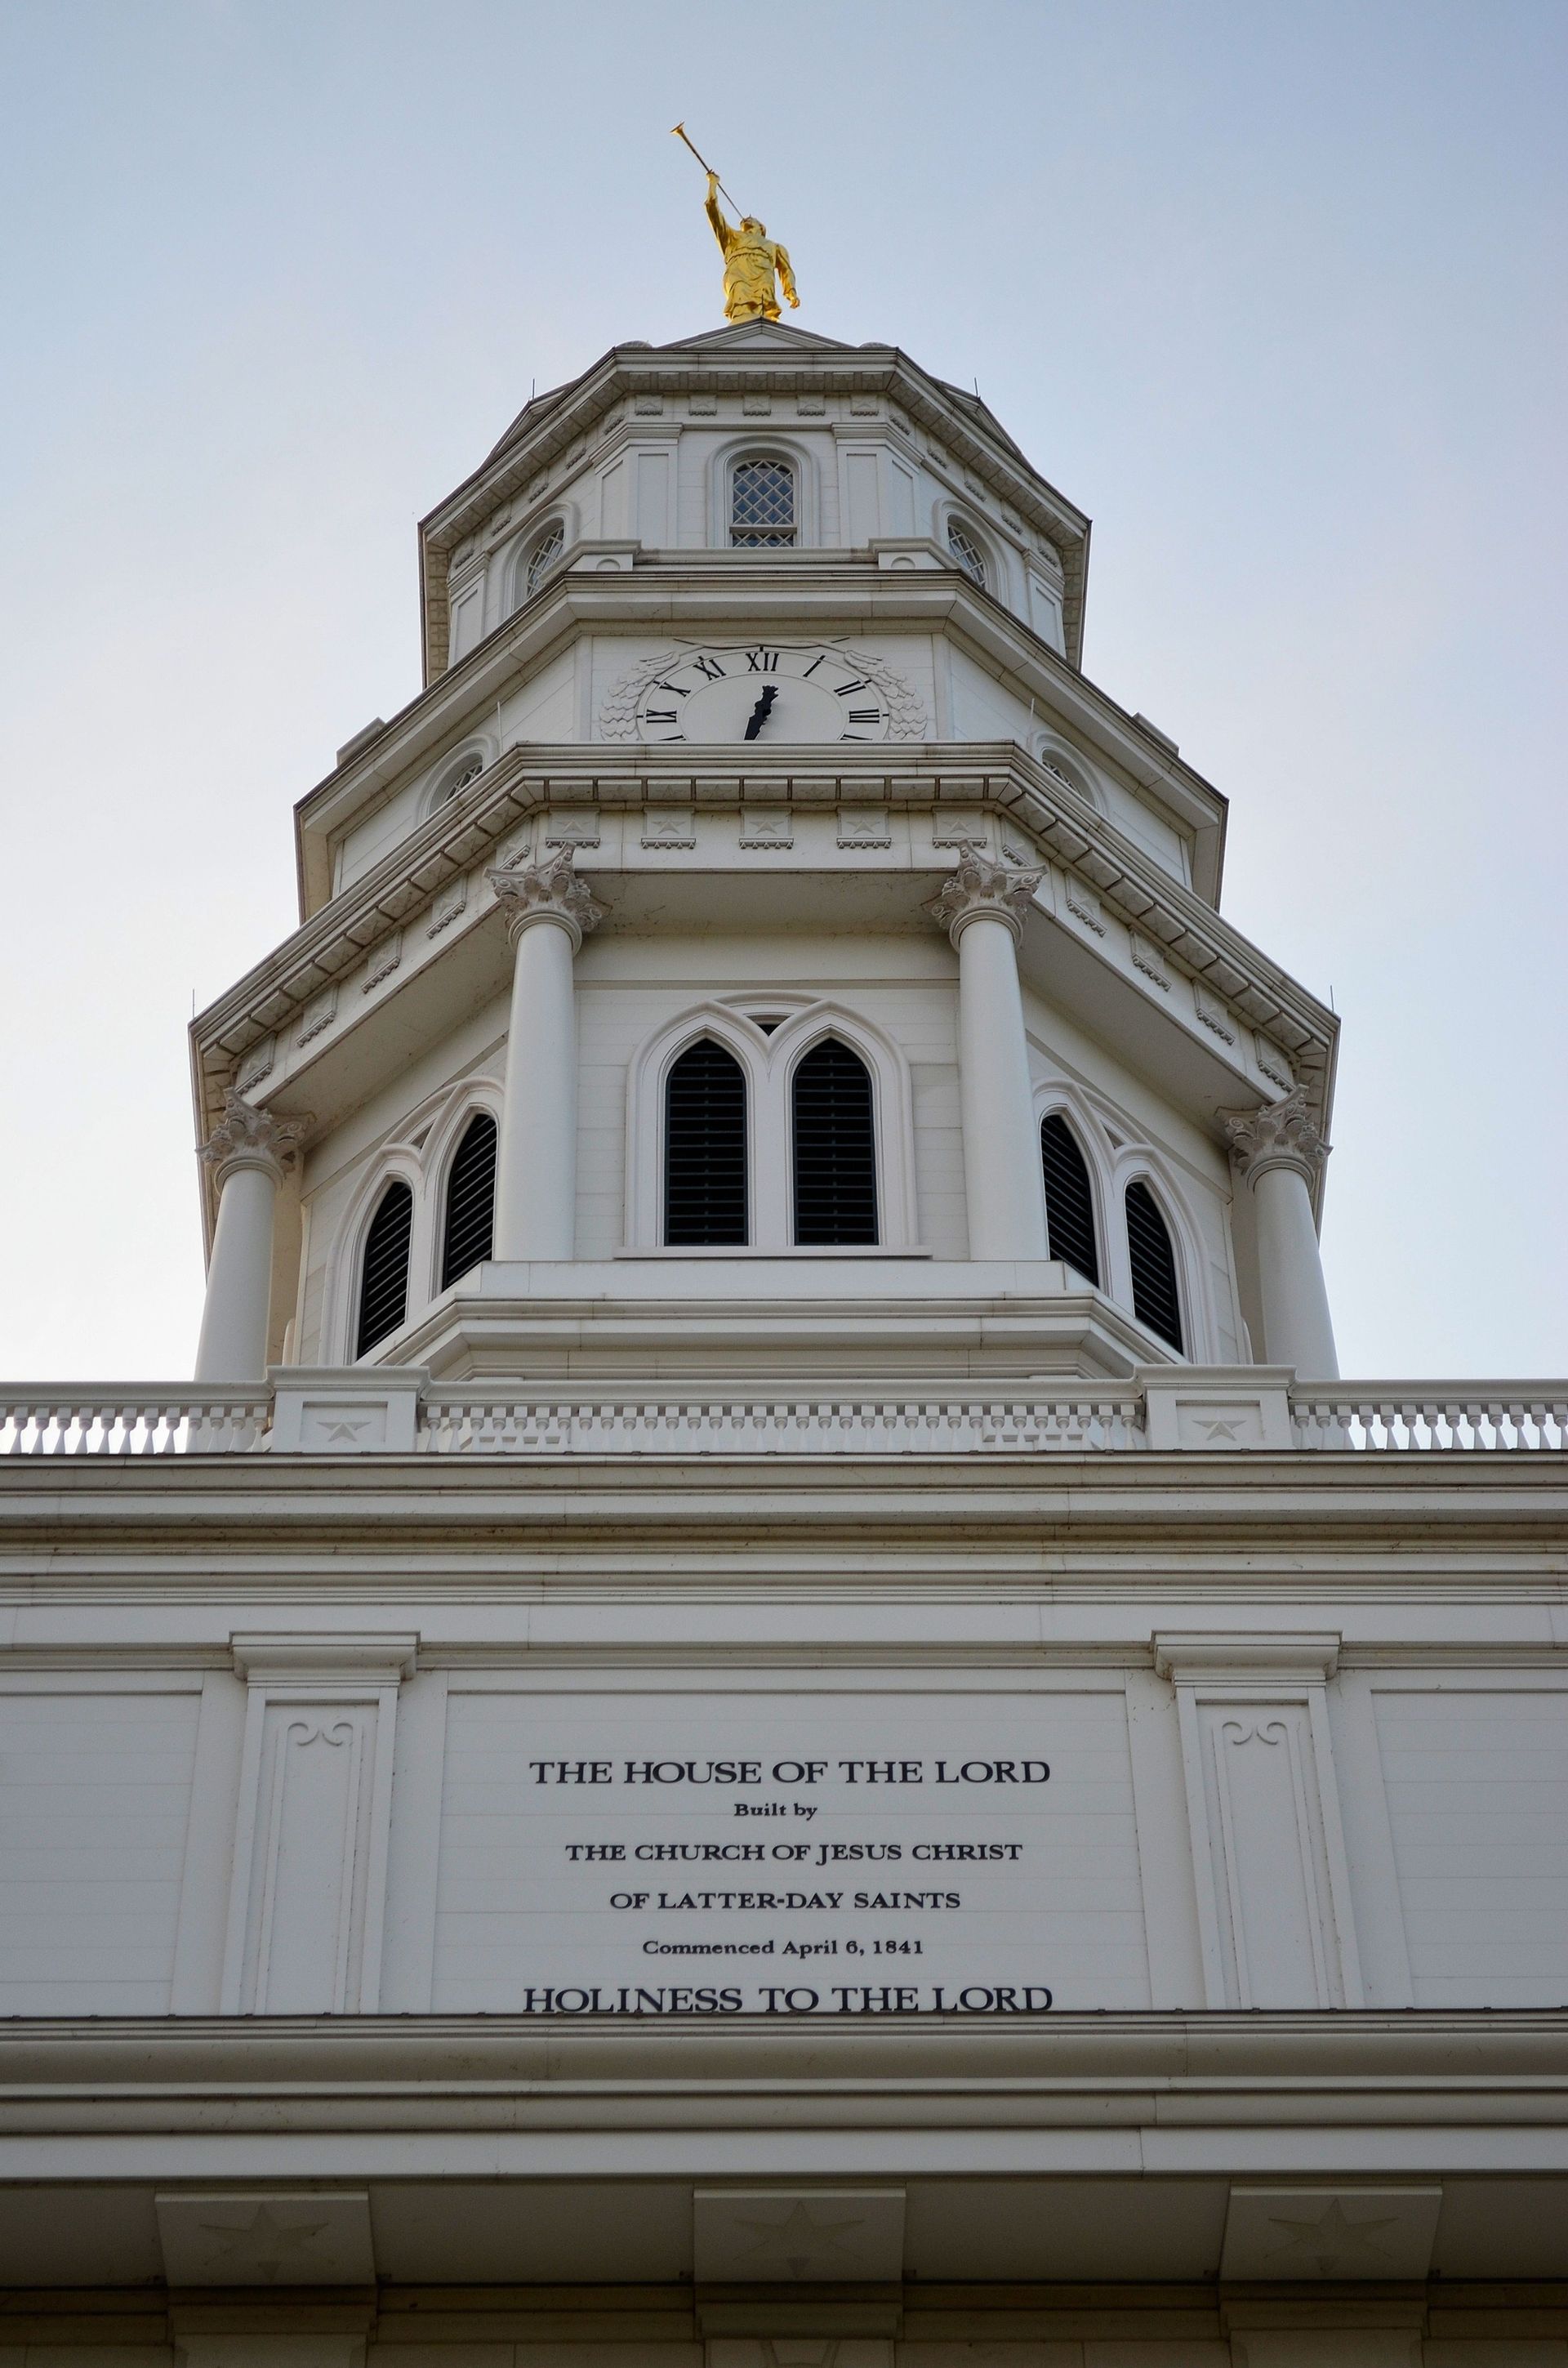 The Nauvoo Illinois Temple spire, including “Holiness to the Lord: The House of the Lord.”